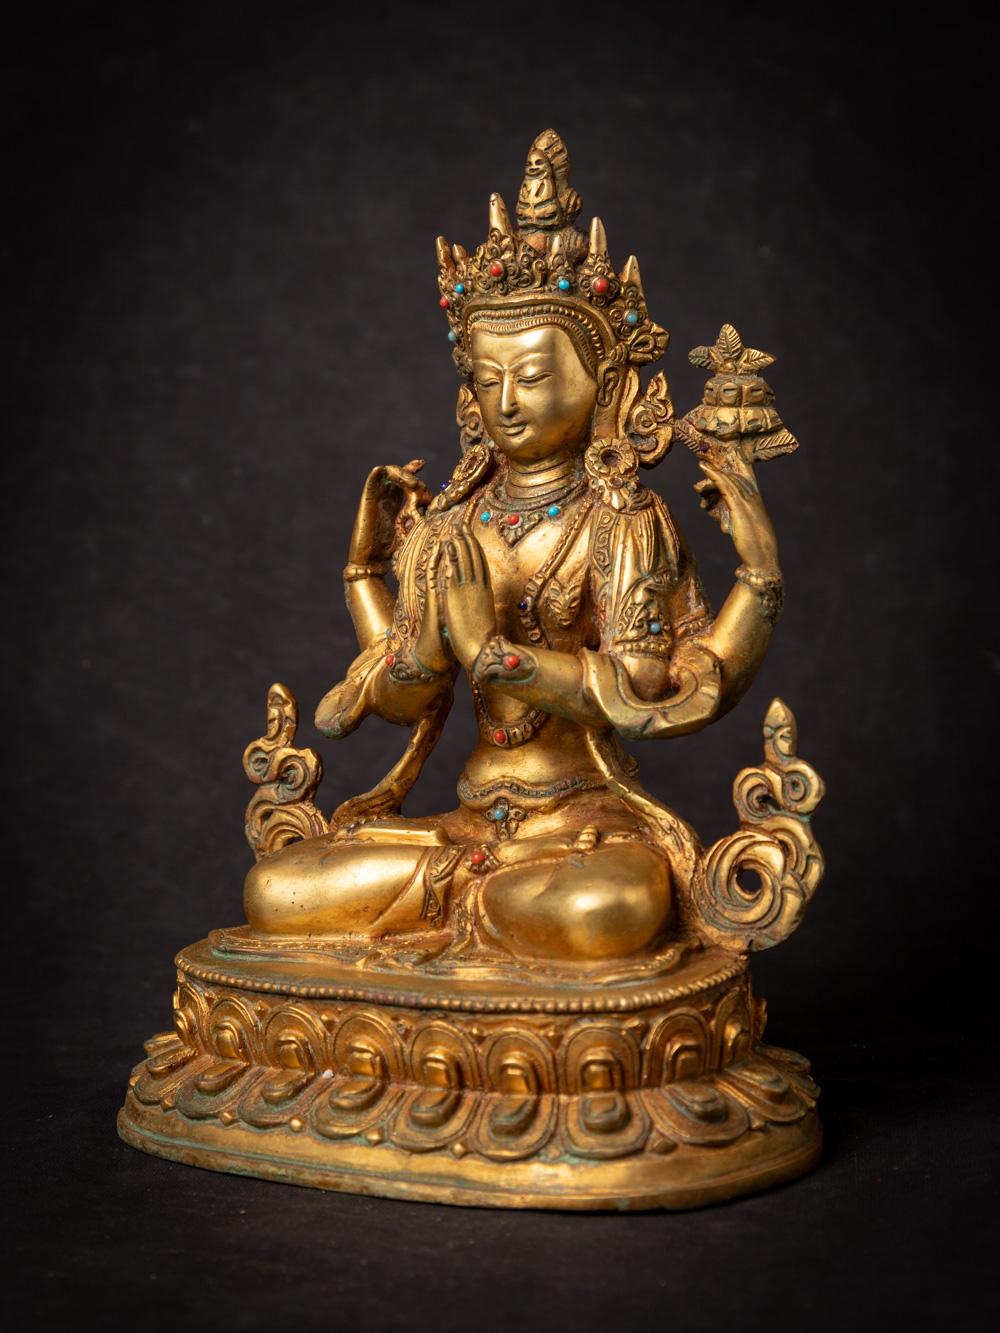 This old bronze Chenrezig statue from Nepal is a remarkable piece of religious artistry. Crafted from bronze and adorned with intricate fire gilding, it stands at a height of 23.2 cm, with dimensions of 16.5 cm in width and 12.3 cm in depth.